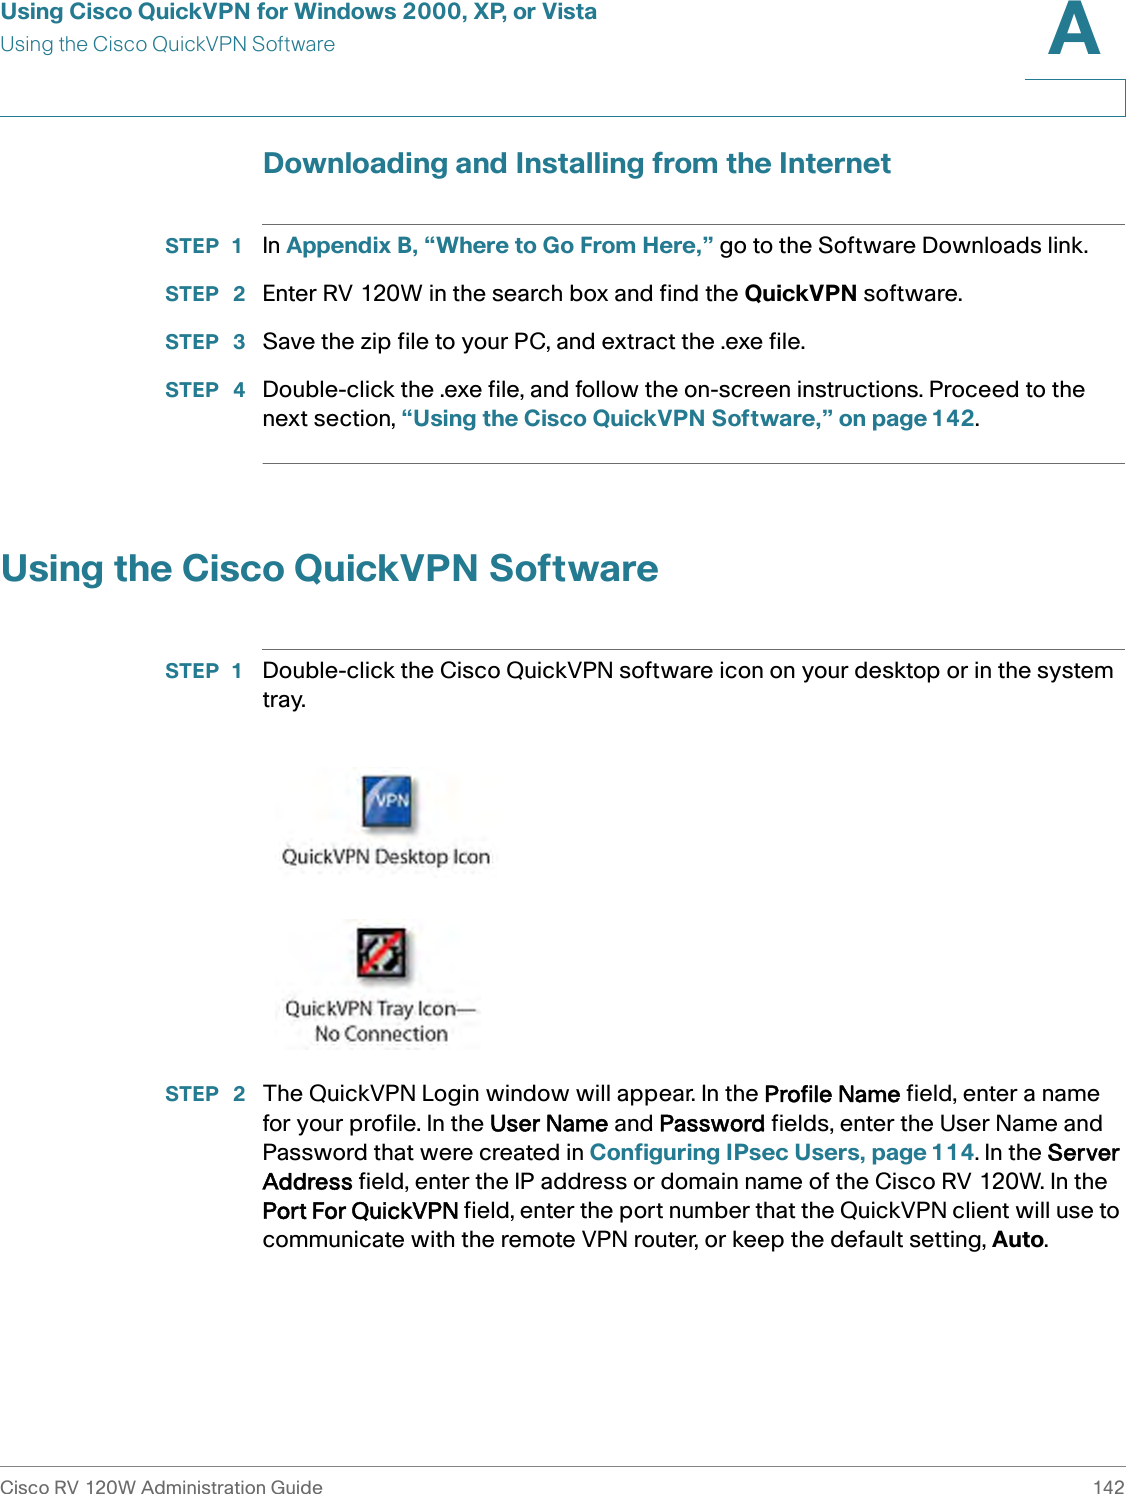 Using Cisco QuickVPN for Windows 2000, XP, or VistaUsing the Cisco QuickVPN SoftwareCisco RV 120W Administration Guide 142A Downloading and Installing from the InternetSTEP 1 In Appendix B, “Where to Go From Here,” go to the Software Downloads link.STEP  2 Enter RV 120W in the search box and find the QuickVPN software.STEP  3 Save the zip file to your PC, and extract the .exe file.STEP  4 Double-click the .exe file, and follow the on-screen instructions. Proceed to the next section, “Using the Cisco QuickVPN Software,” on page 142.Using the Cisco QuickVPN SoftwareSTEP 1 Double-click the Cisco QuickVPN software icon on your desktop or in the system tray.STEP  2 The QuickVPN Login window will appear. In the Profile Name field, enter a name for your profile. In the User Name and Password fields, enter the User Name and Password that were created in Configuring IPsec Users, page 114. In the Server Address field, enter the IP address or domain name of the Cisco RV 120W. In the Port For QuickVPN field, enter the port number that the QuickVPN client will use to communicate with the remote VPN router, or keep the default setting, Auto.